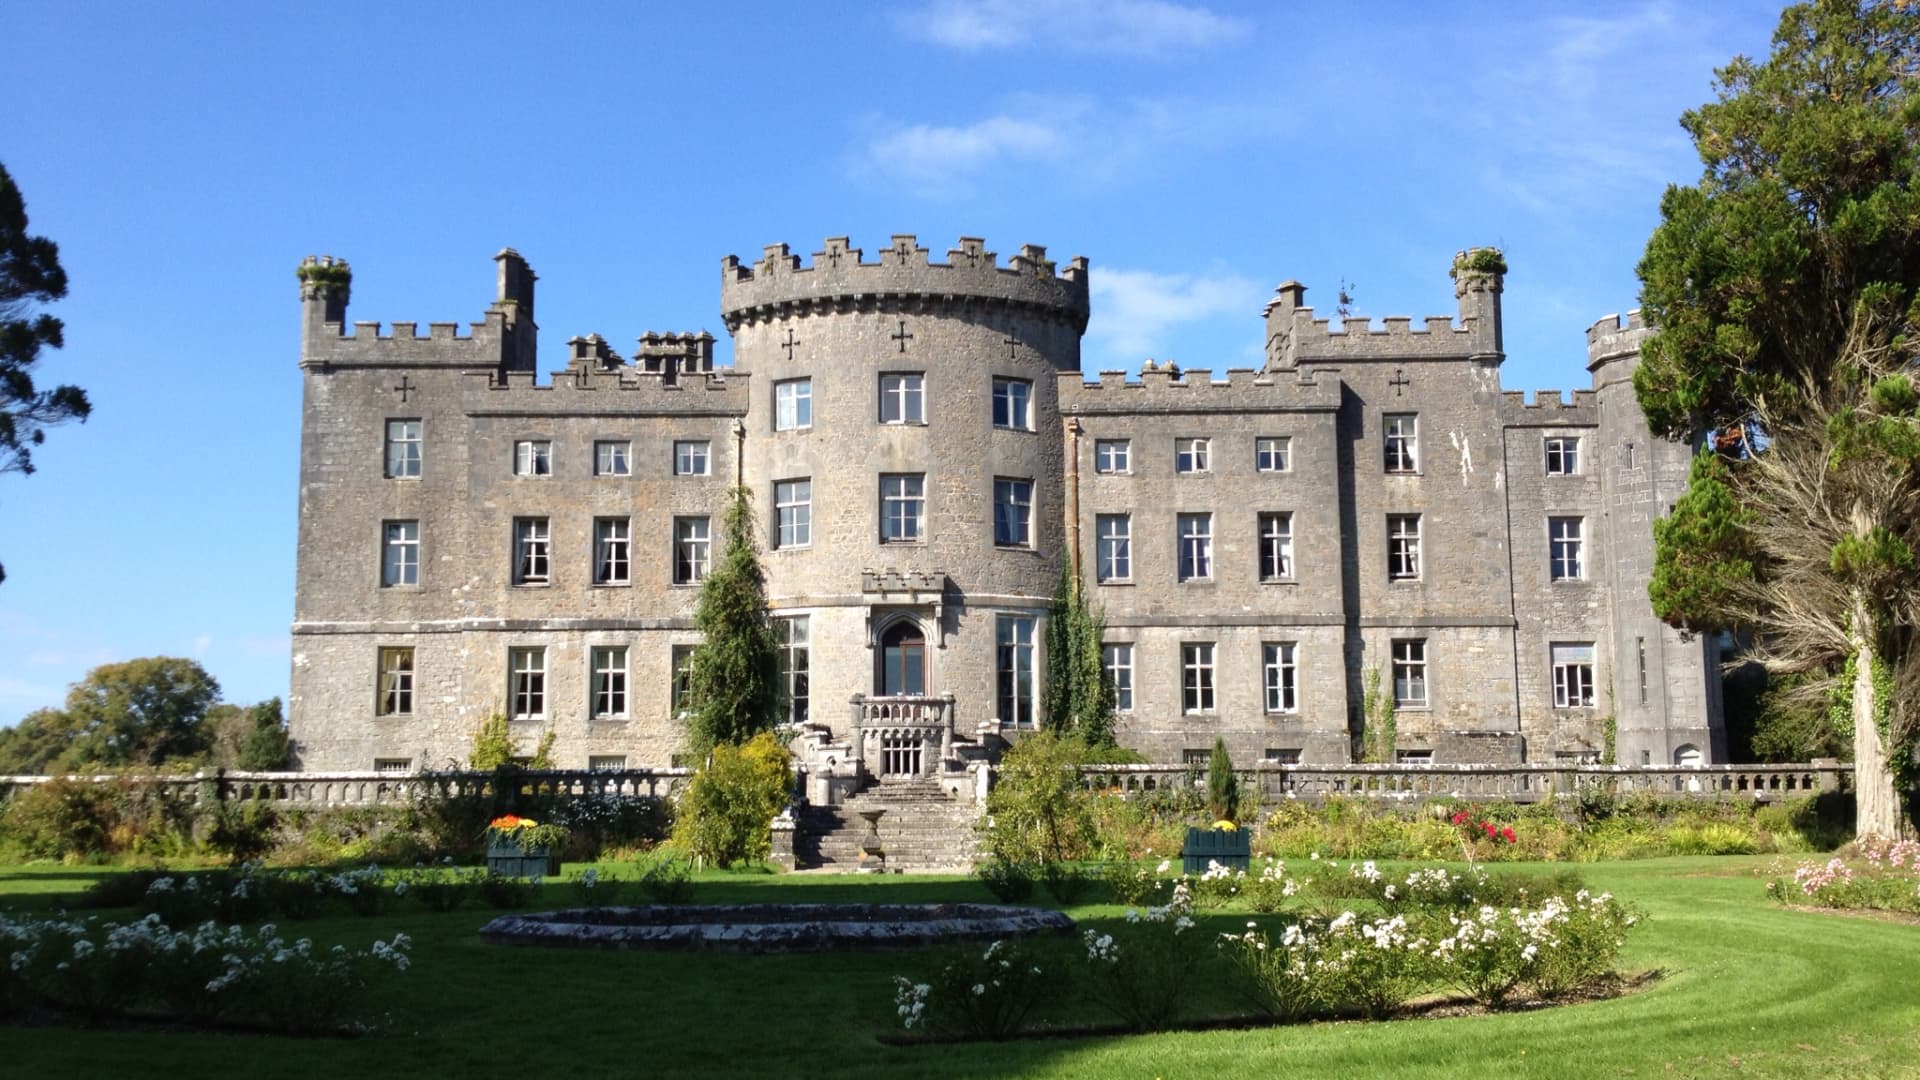 The 31-bedroom Markree Castle in County Sligo, Ireland, sits on 500 acres of land, and former guests include Johnny Cash and June Carter Cash.